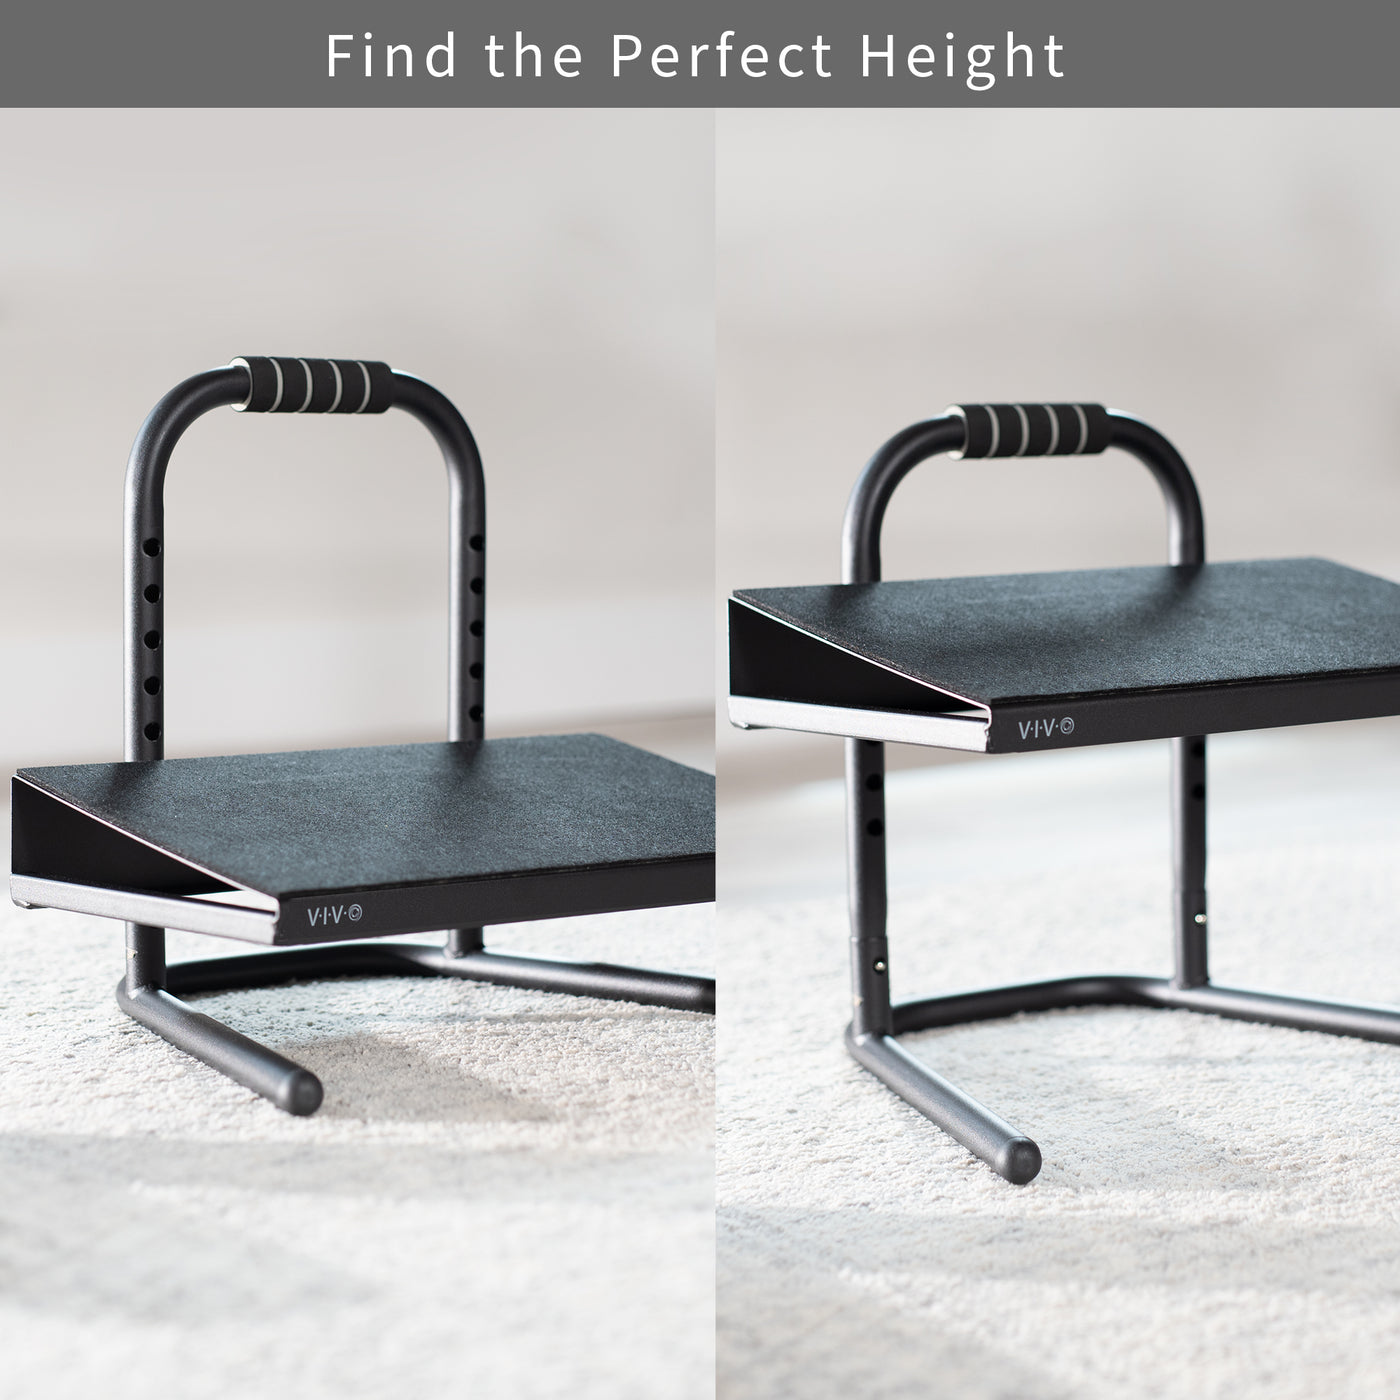 Find the perfect height for your desk space.